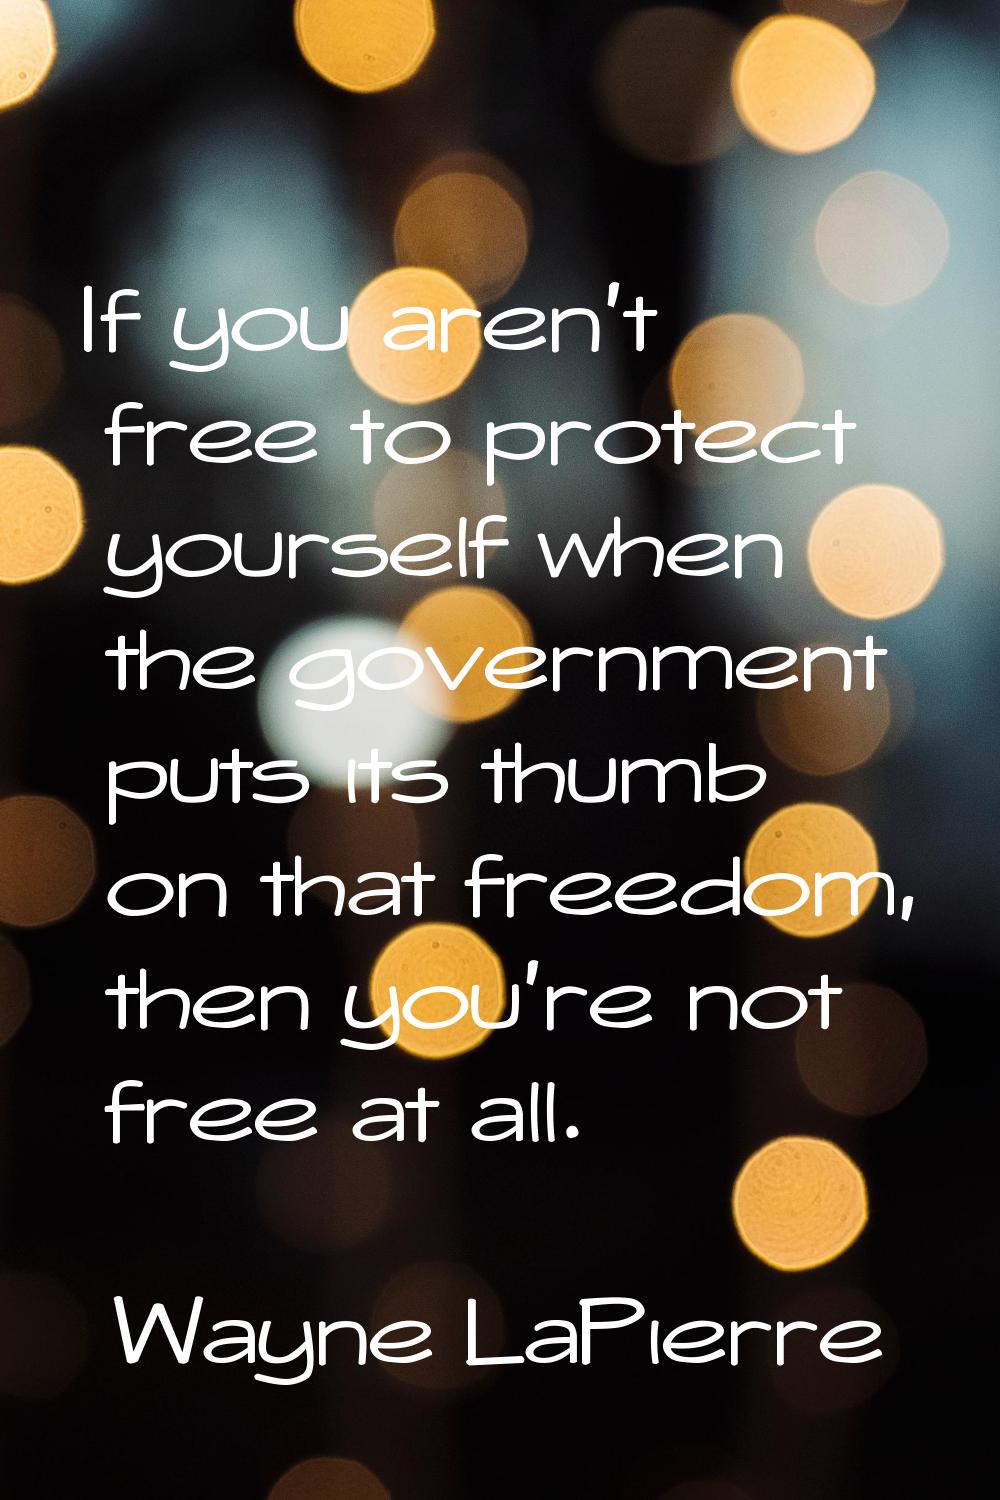 If you aren't free to protect yourself when the government puts its thumb on that freedom, then you